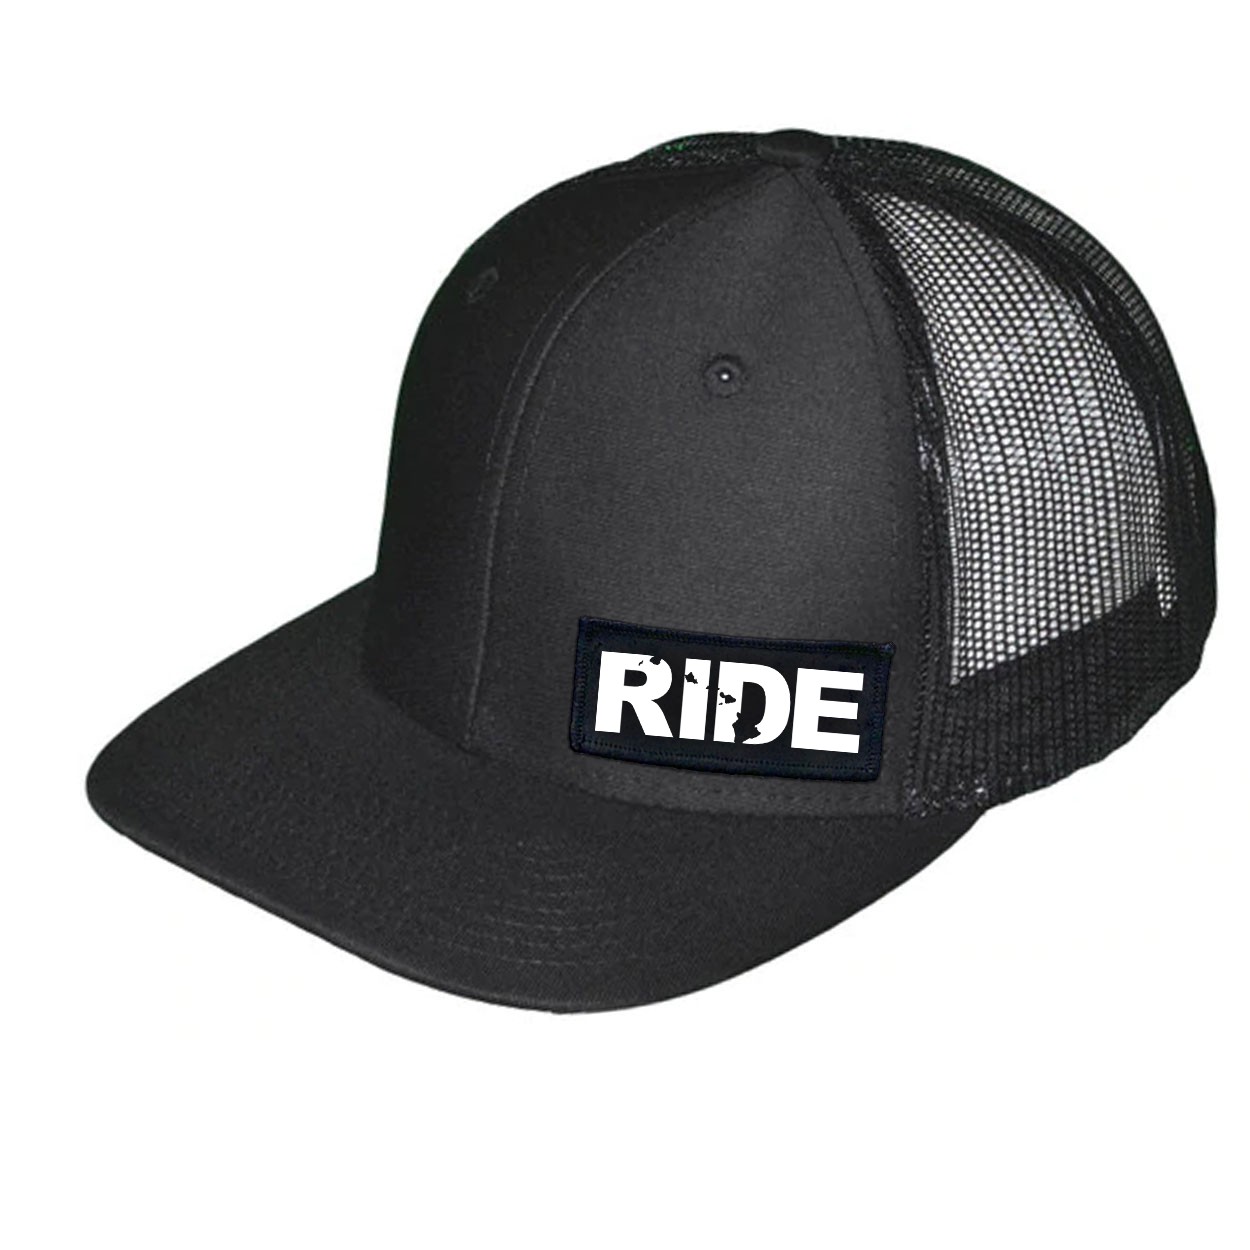 Ride Hawaii Night Out Woven Patch Snapback Trucker Hat Black (White Logo)